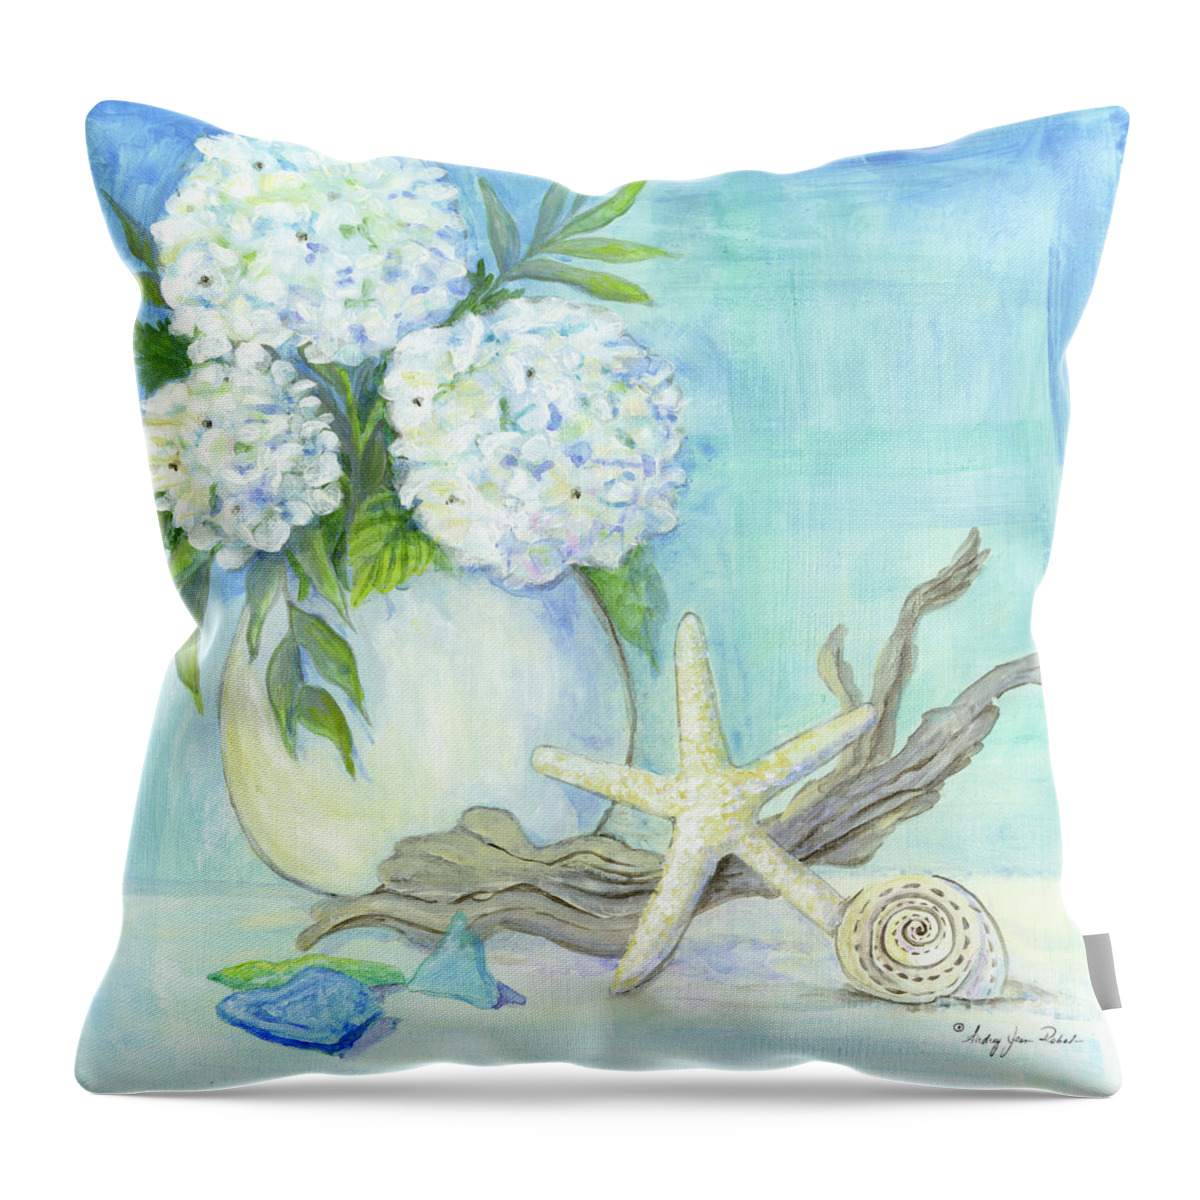 White Hydrangeas Throw Pillow featuring the painting Cottage at the Shore 1 White Hydrangea Bouquet w Driftwood Starfish Sea Glass and Seashell by Audrey Jeanne Roberts